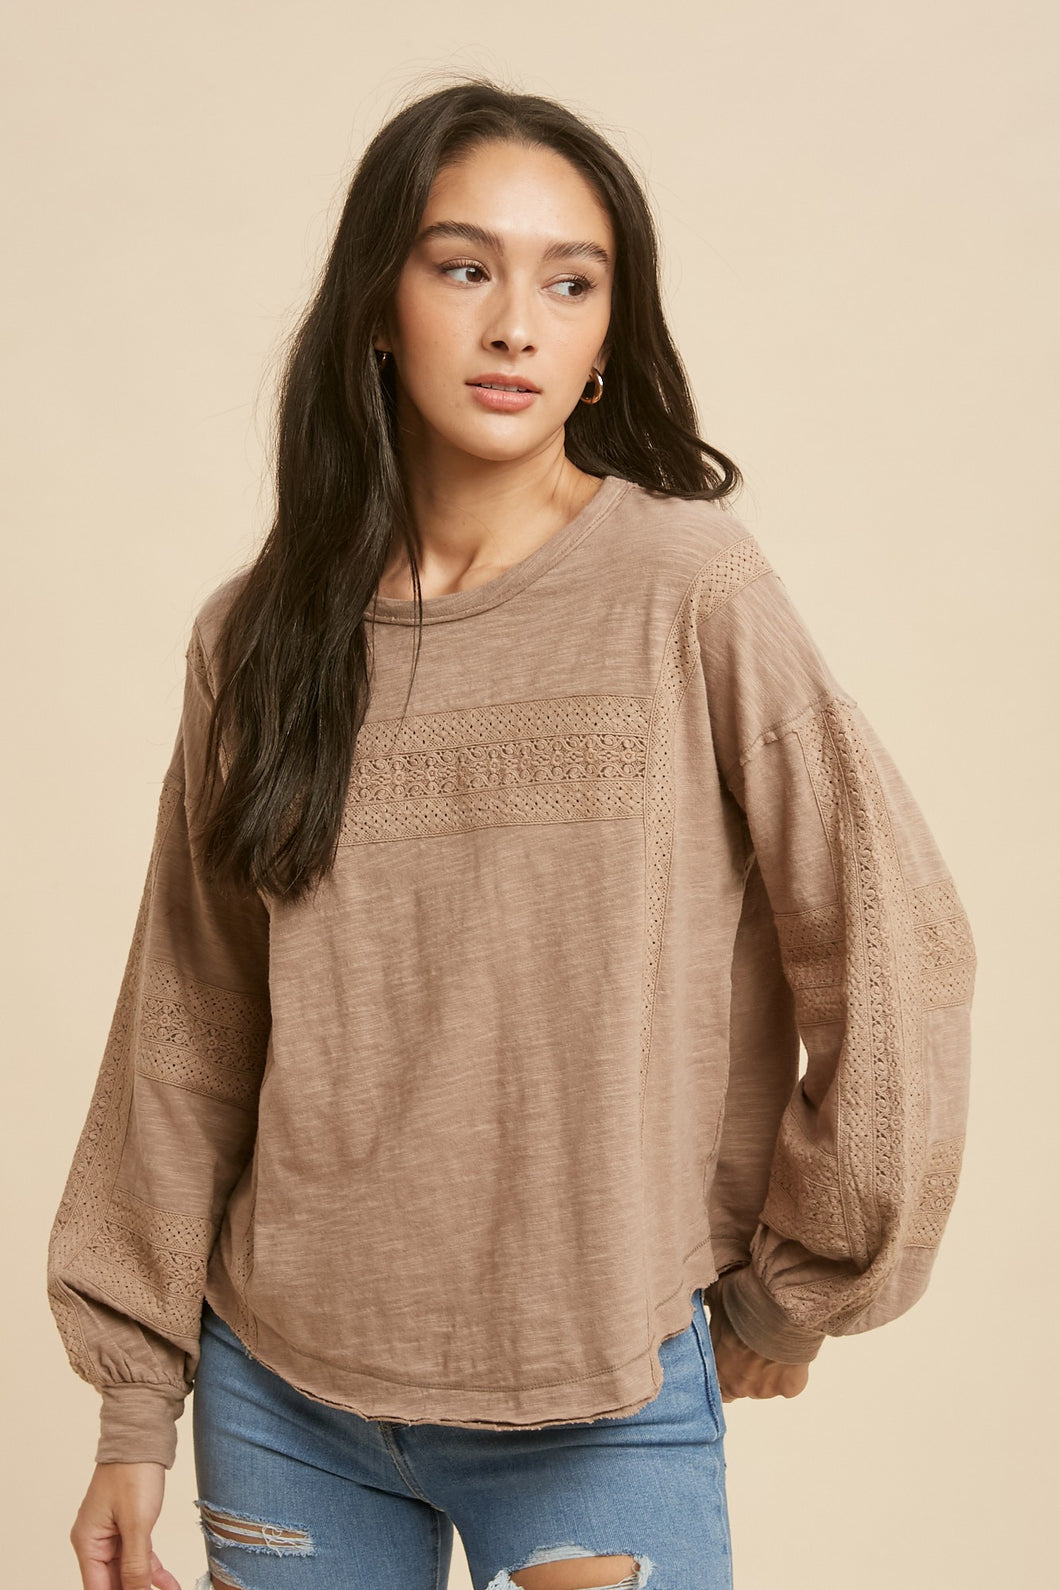 Taupe Lace Inset Long Sleeve Top